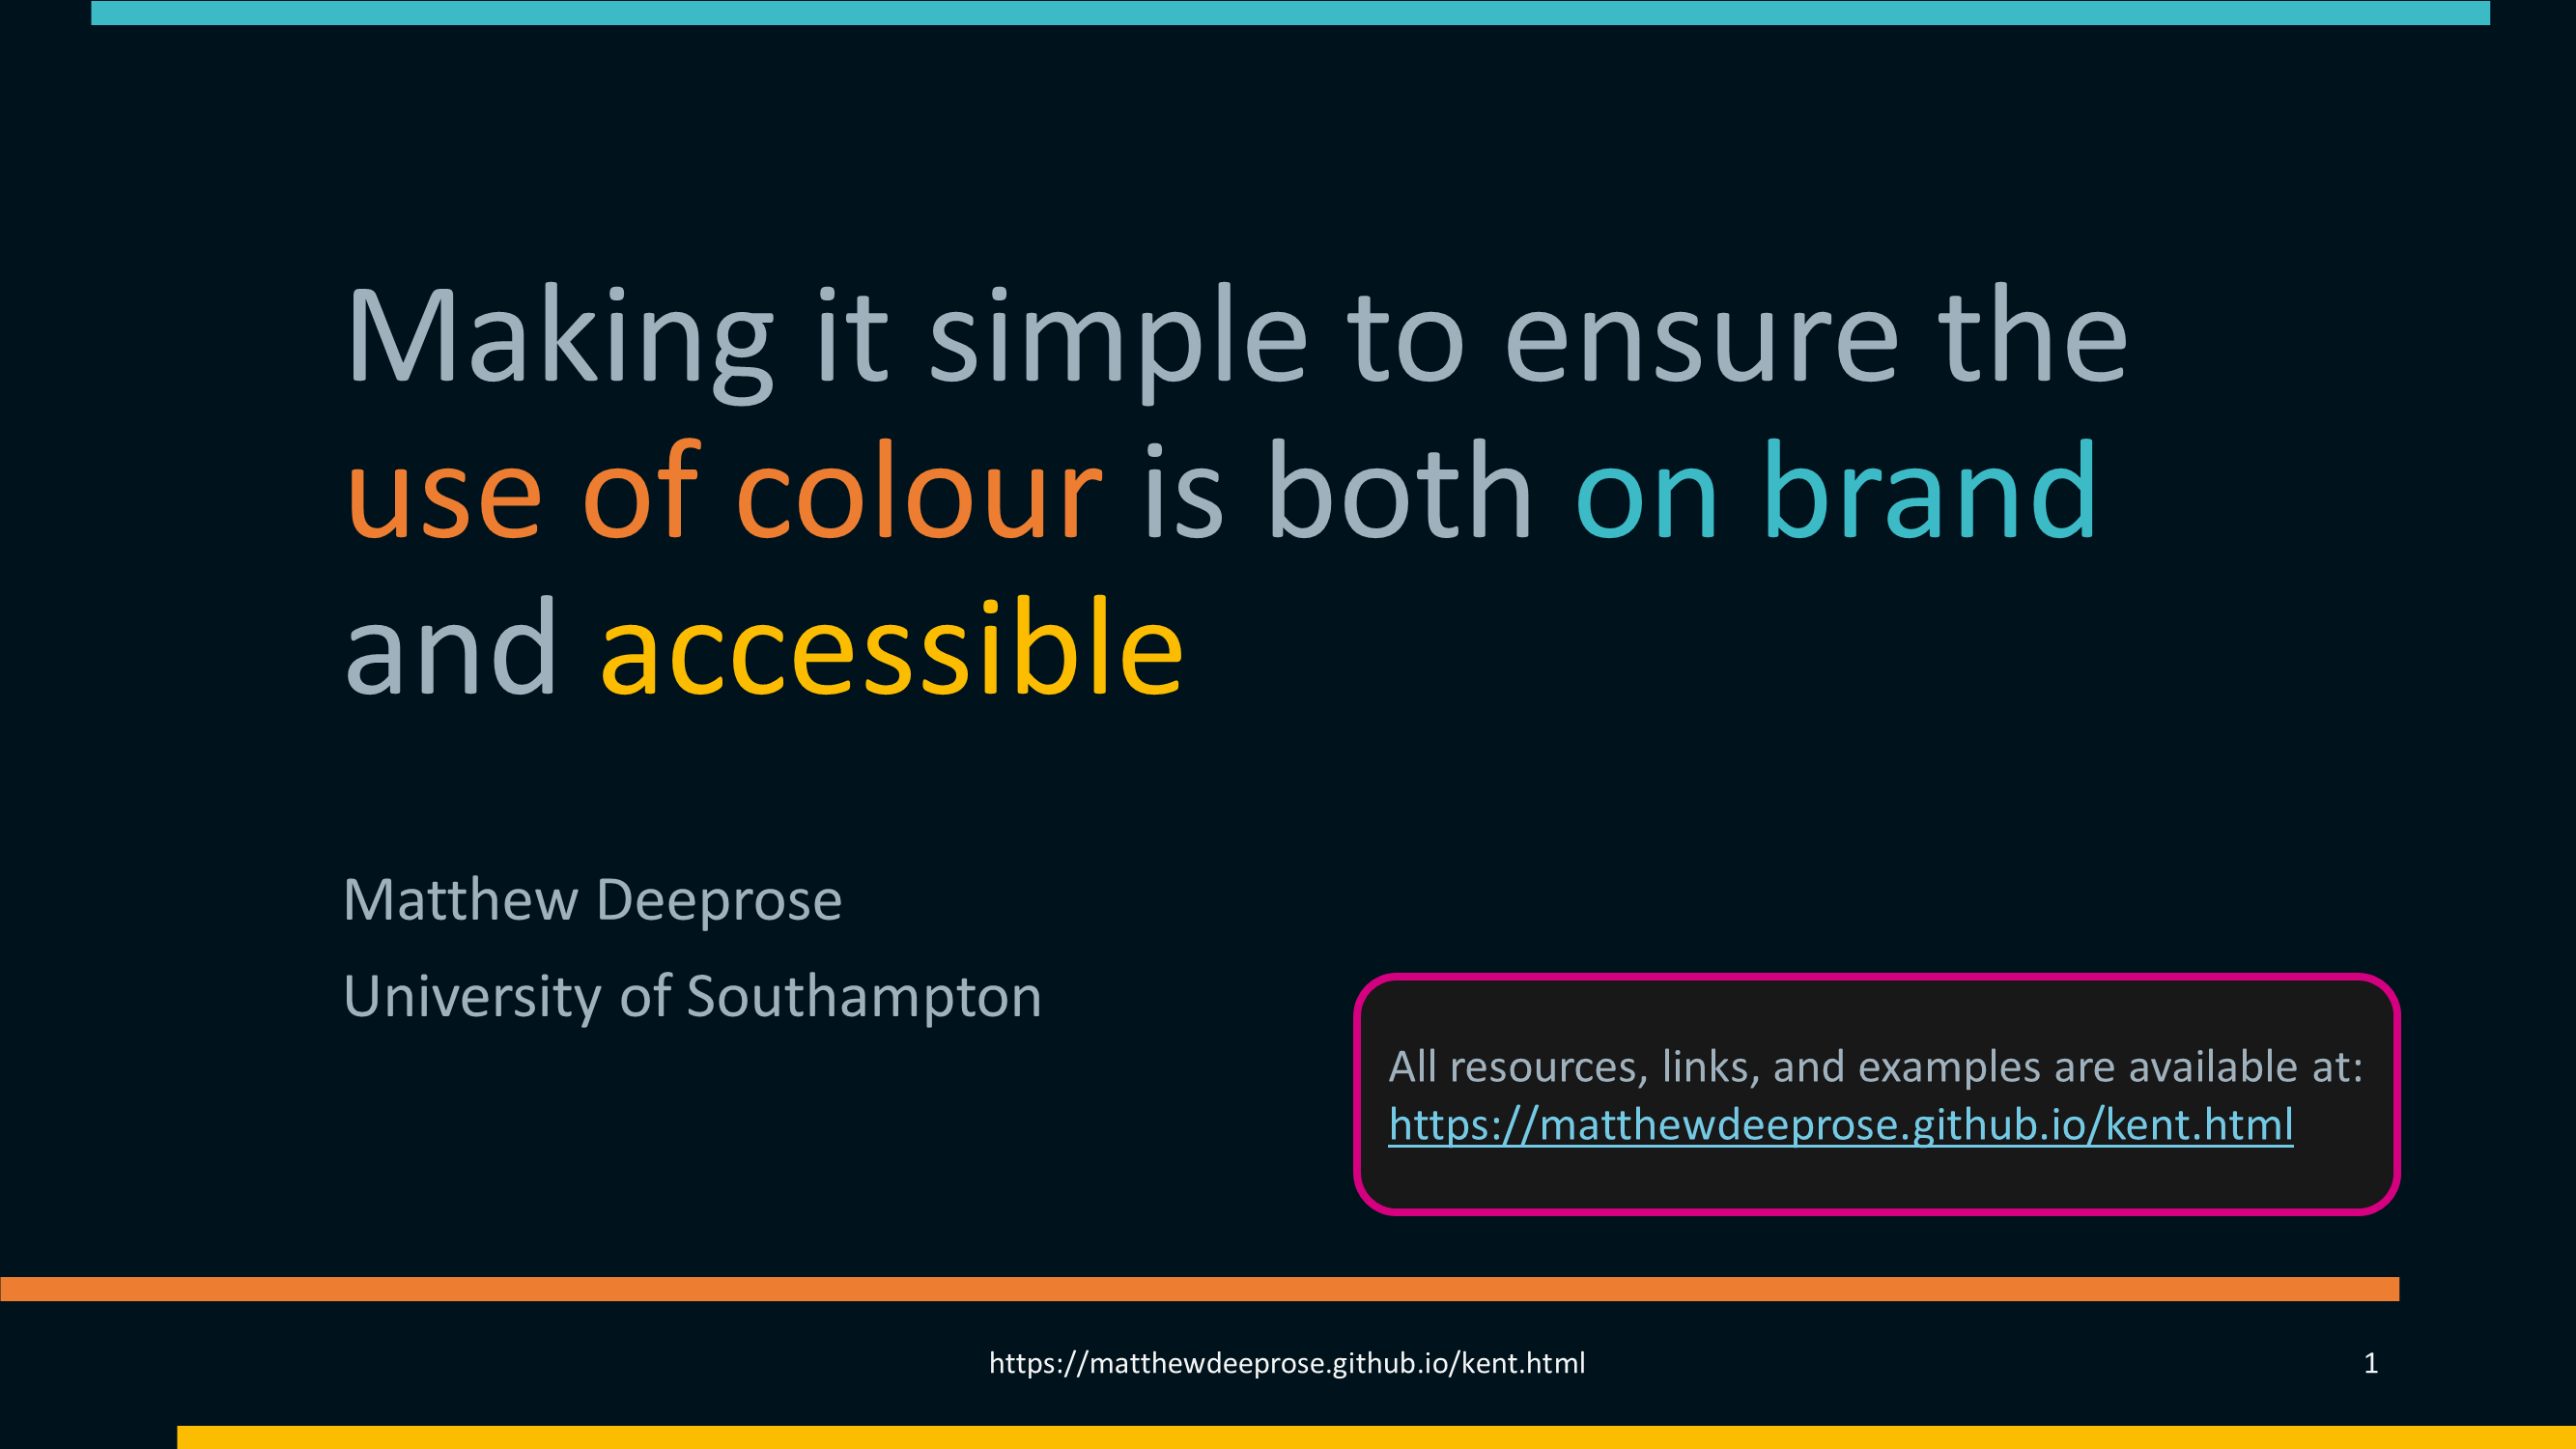 Presentation title: Making it simple to ensure the_use of colour is both on brand and accessible